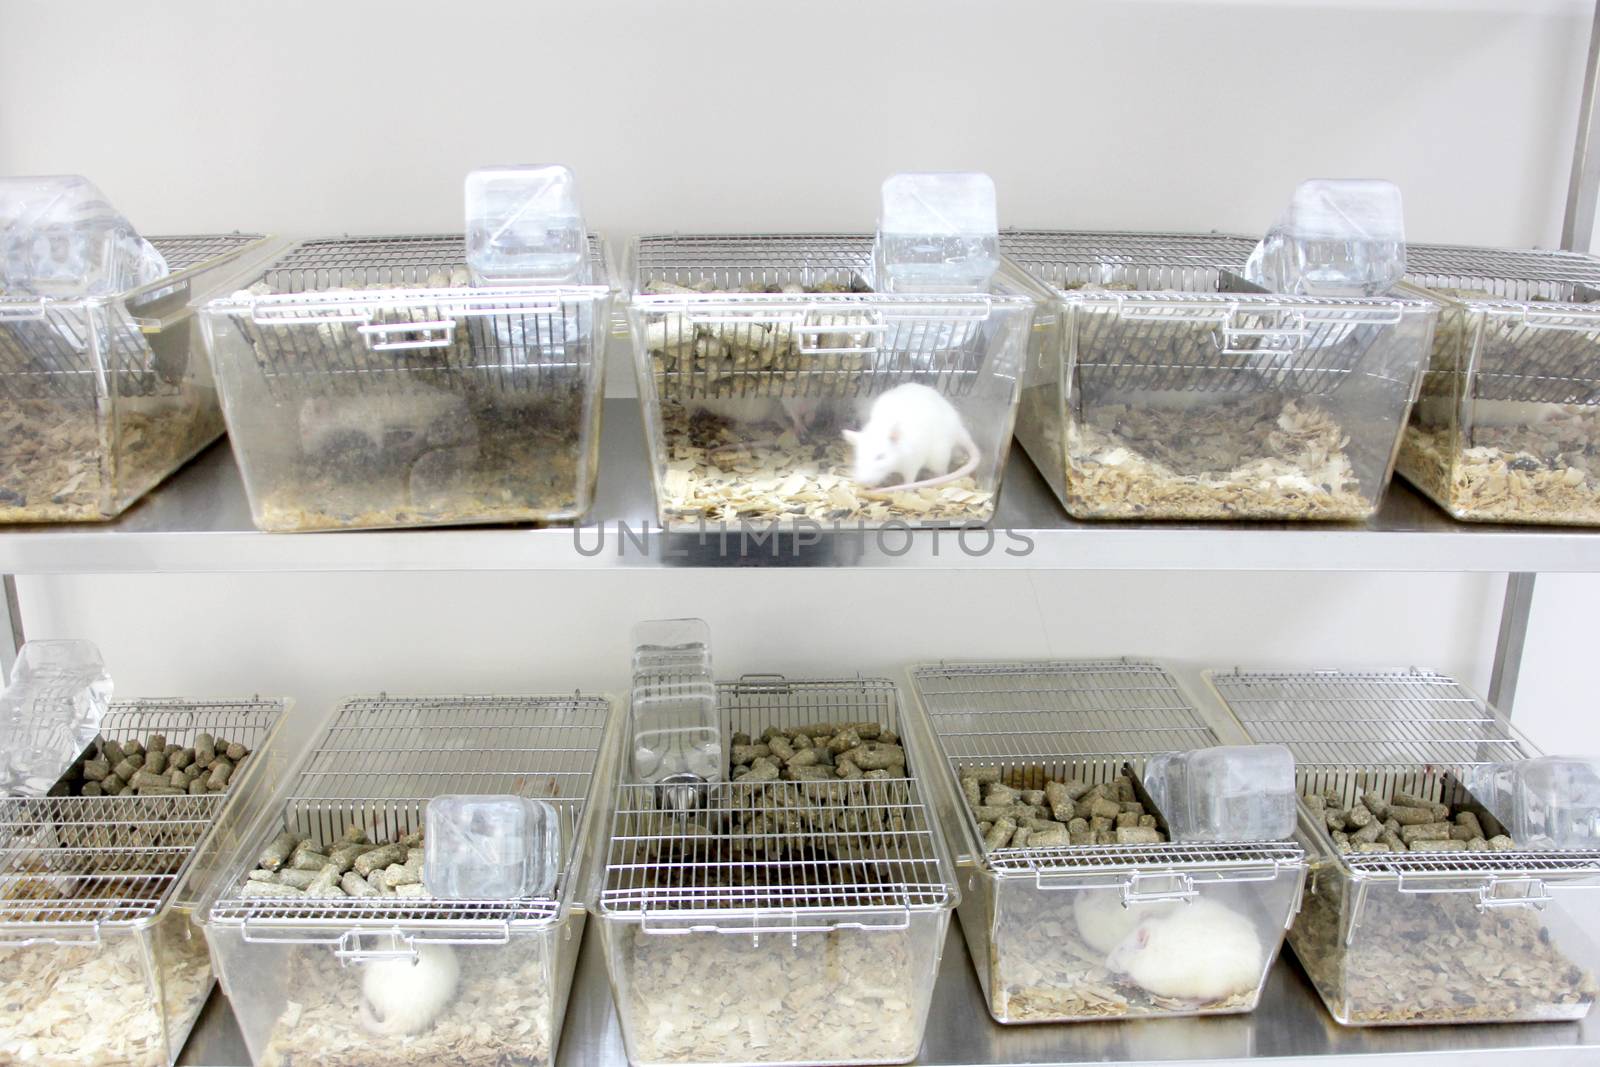 Rats (Albino) having cages for laboratory test.